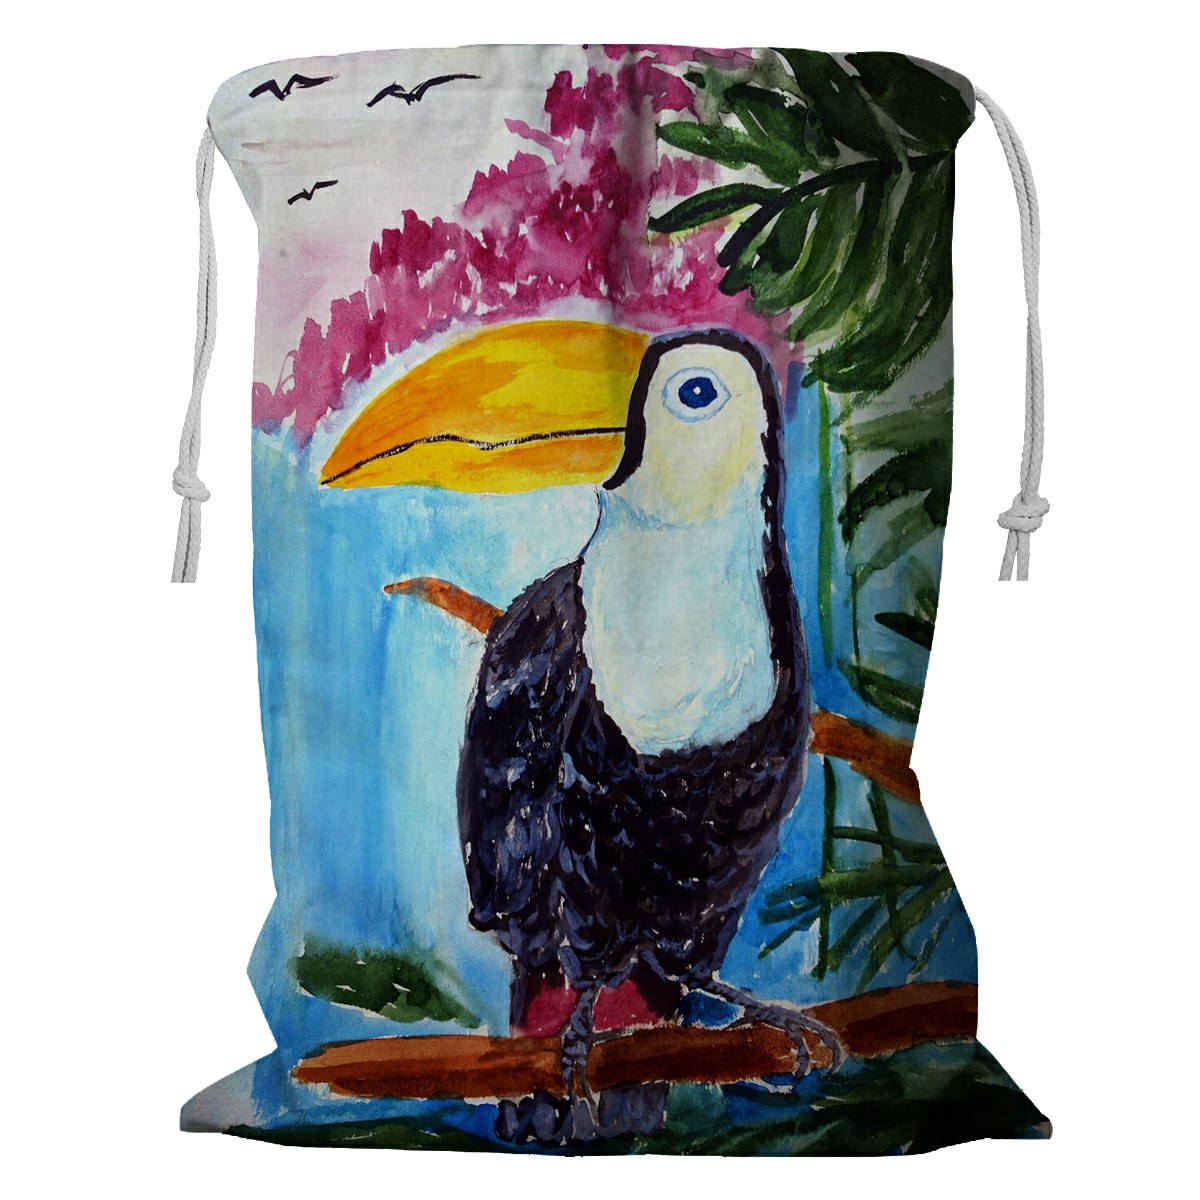 ECZJNT black bird with a yellow beak Toucan in the tropical forest Storage  Basket Laundry Bag with Drawstring 18x24 Inch - Walmart.com